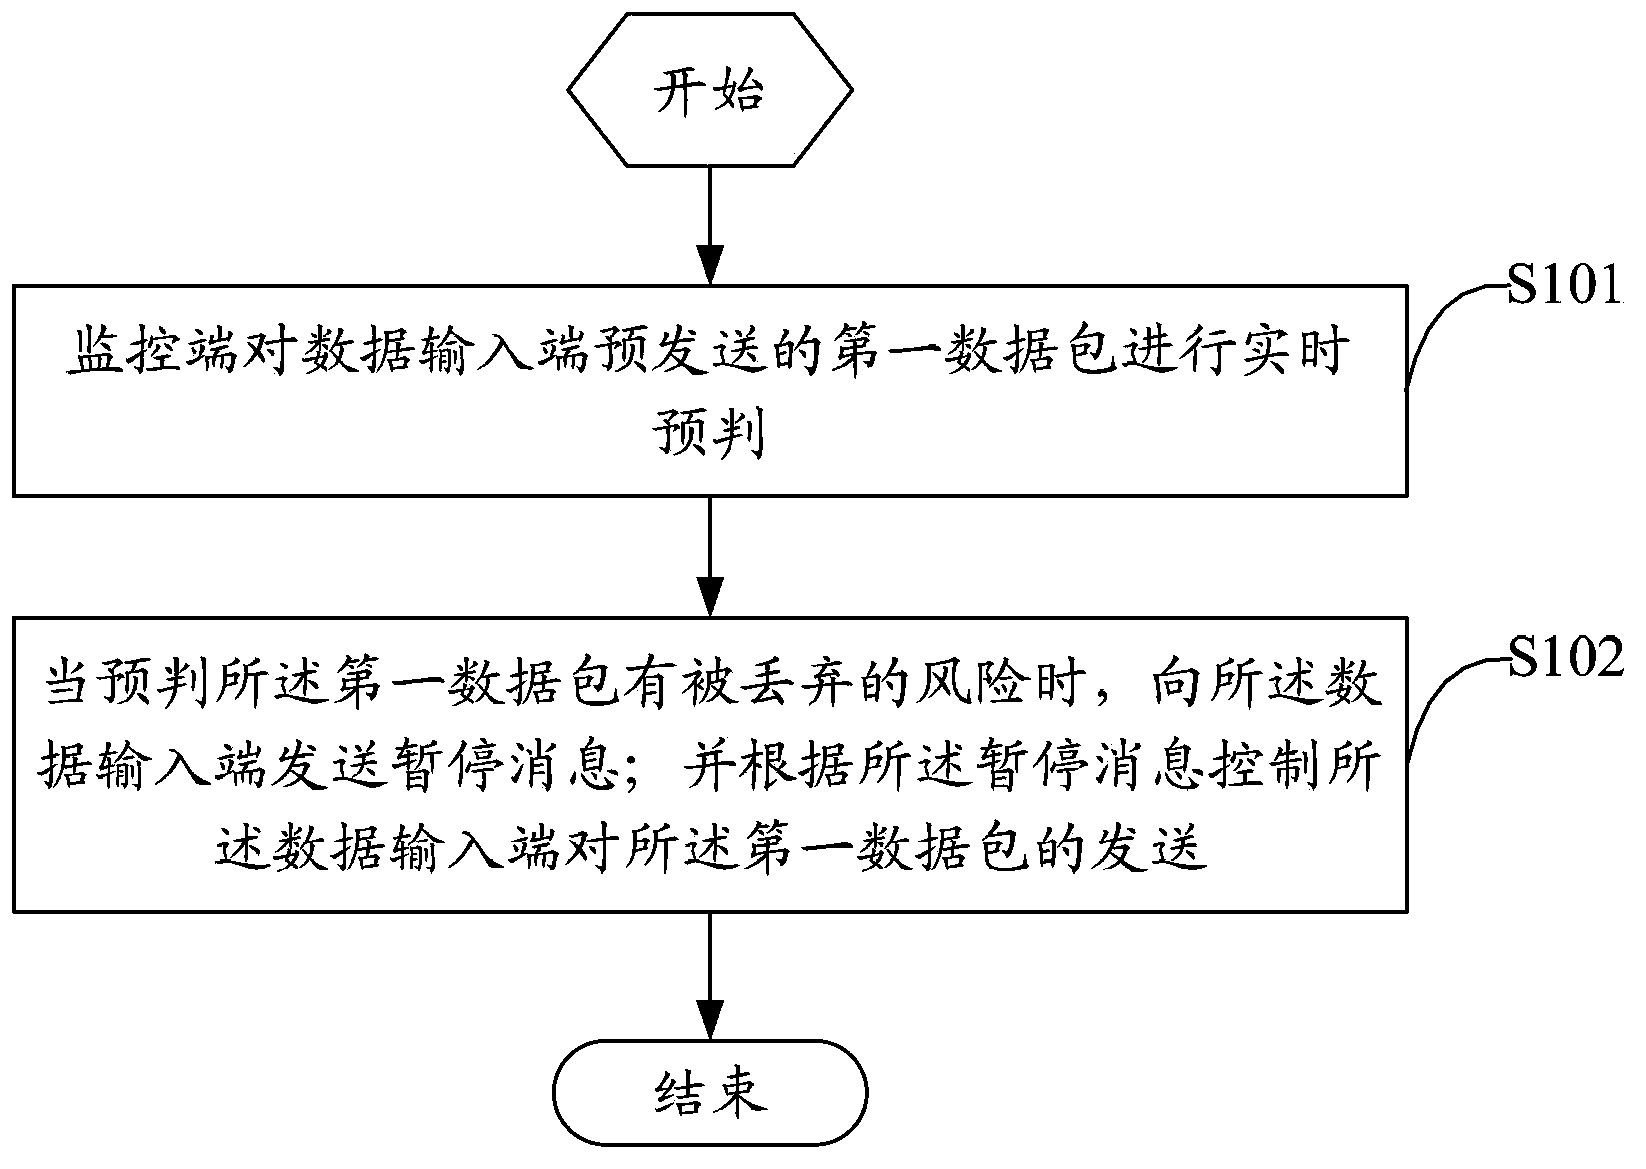 Flow control method and monitoring end